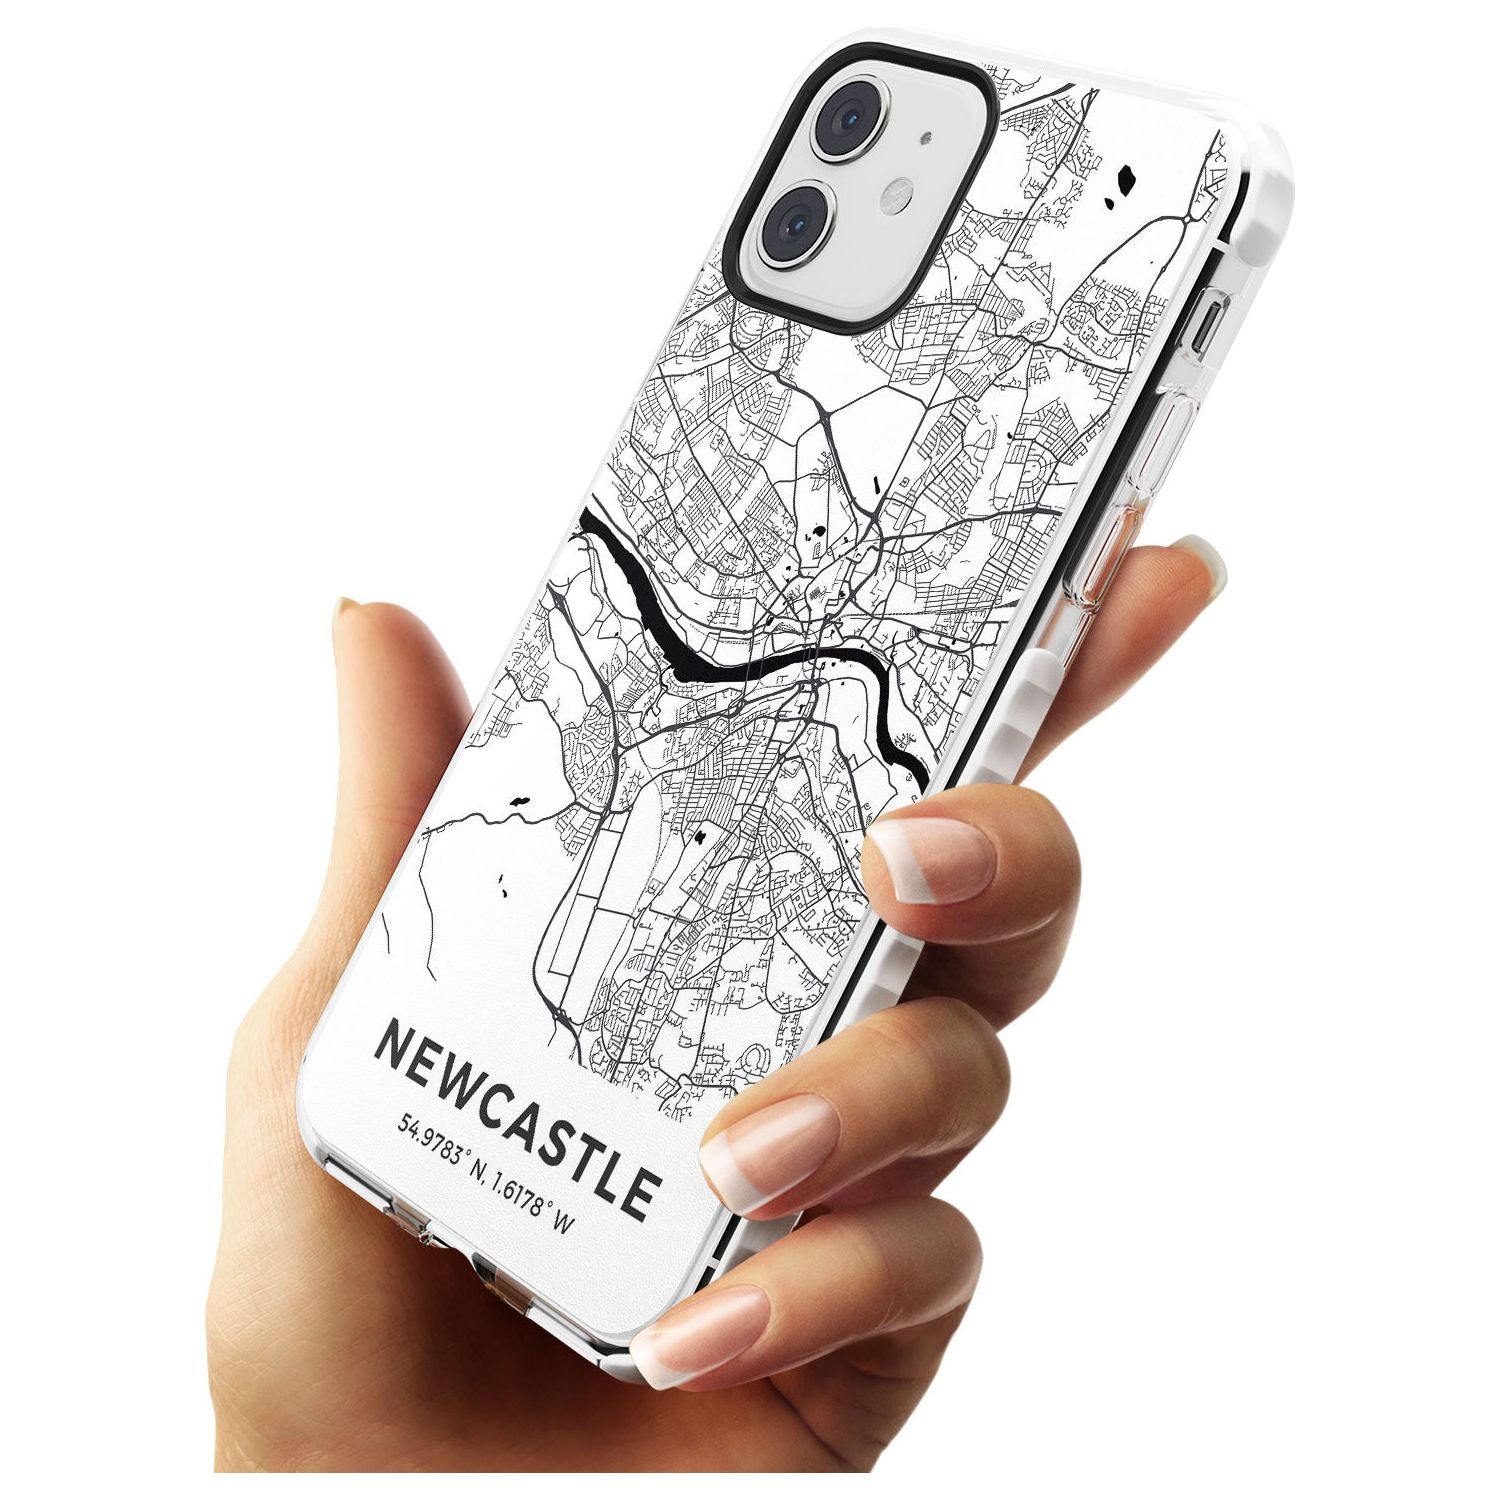 Map of Newcastle, England Impact Phone Case for iPhone 11